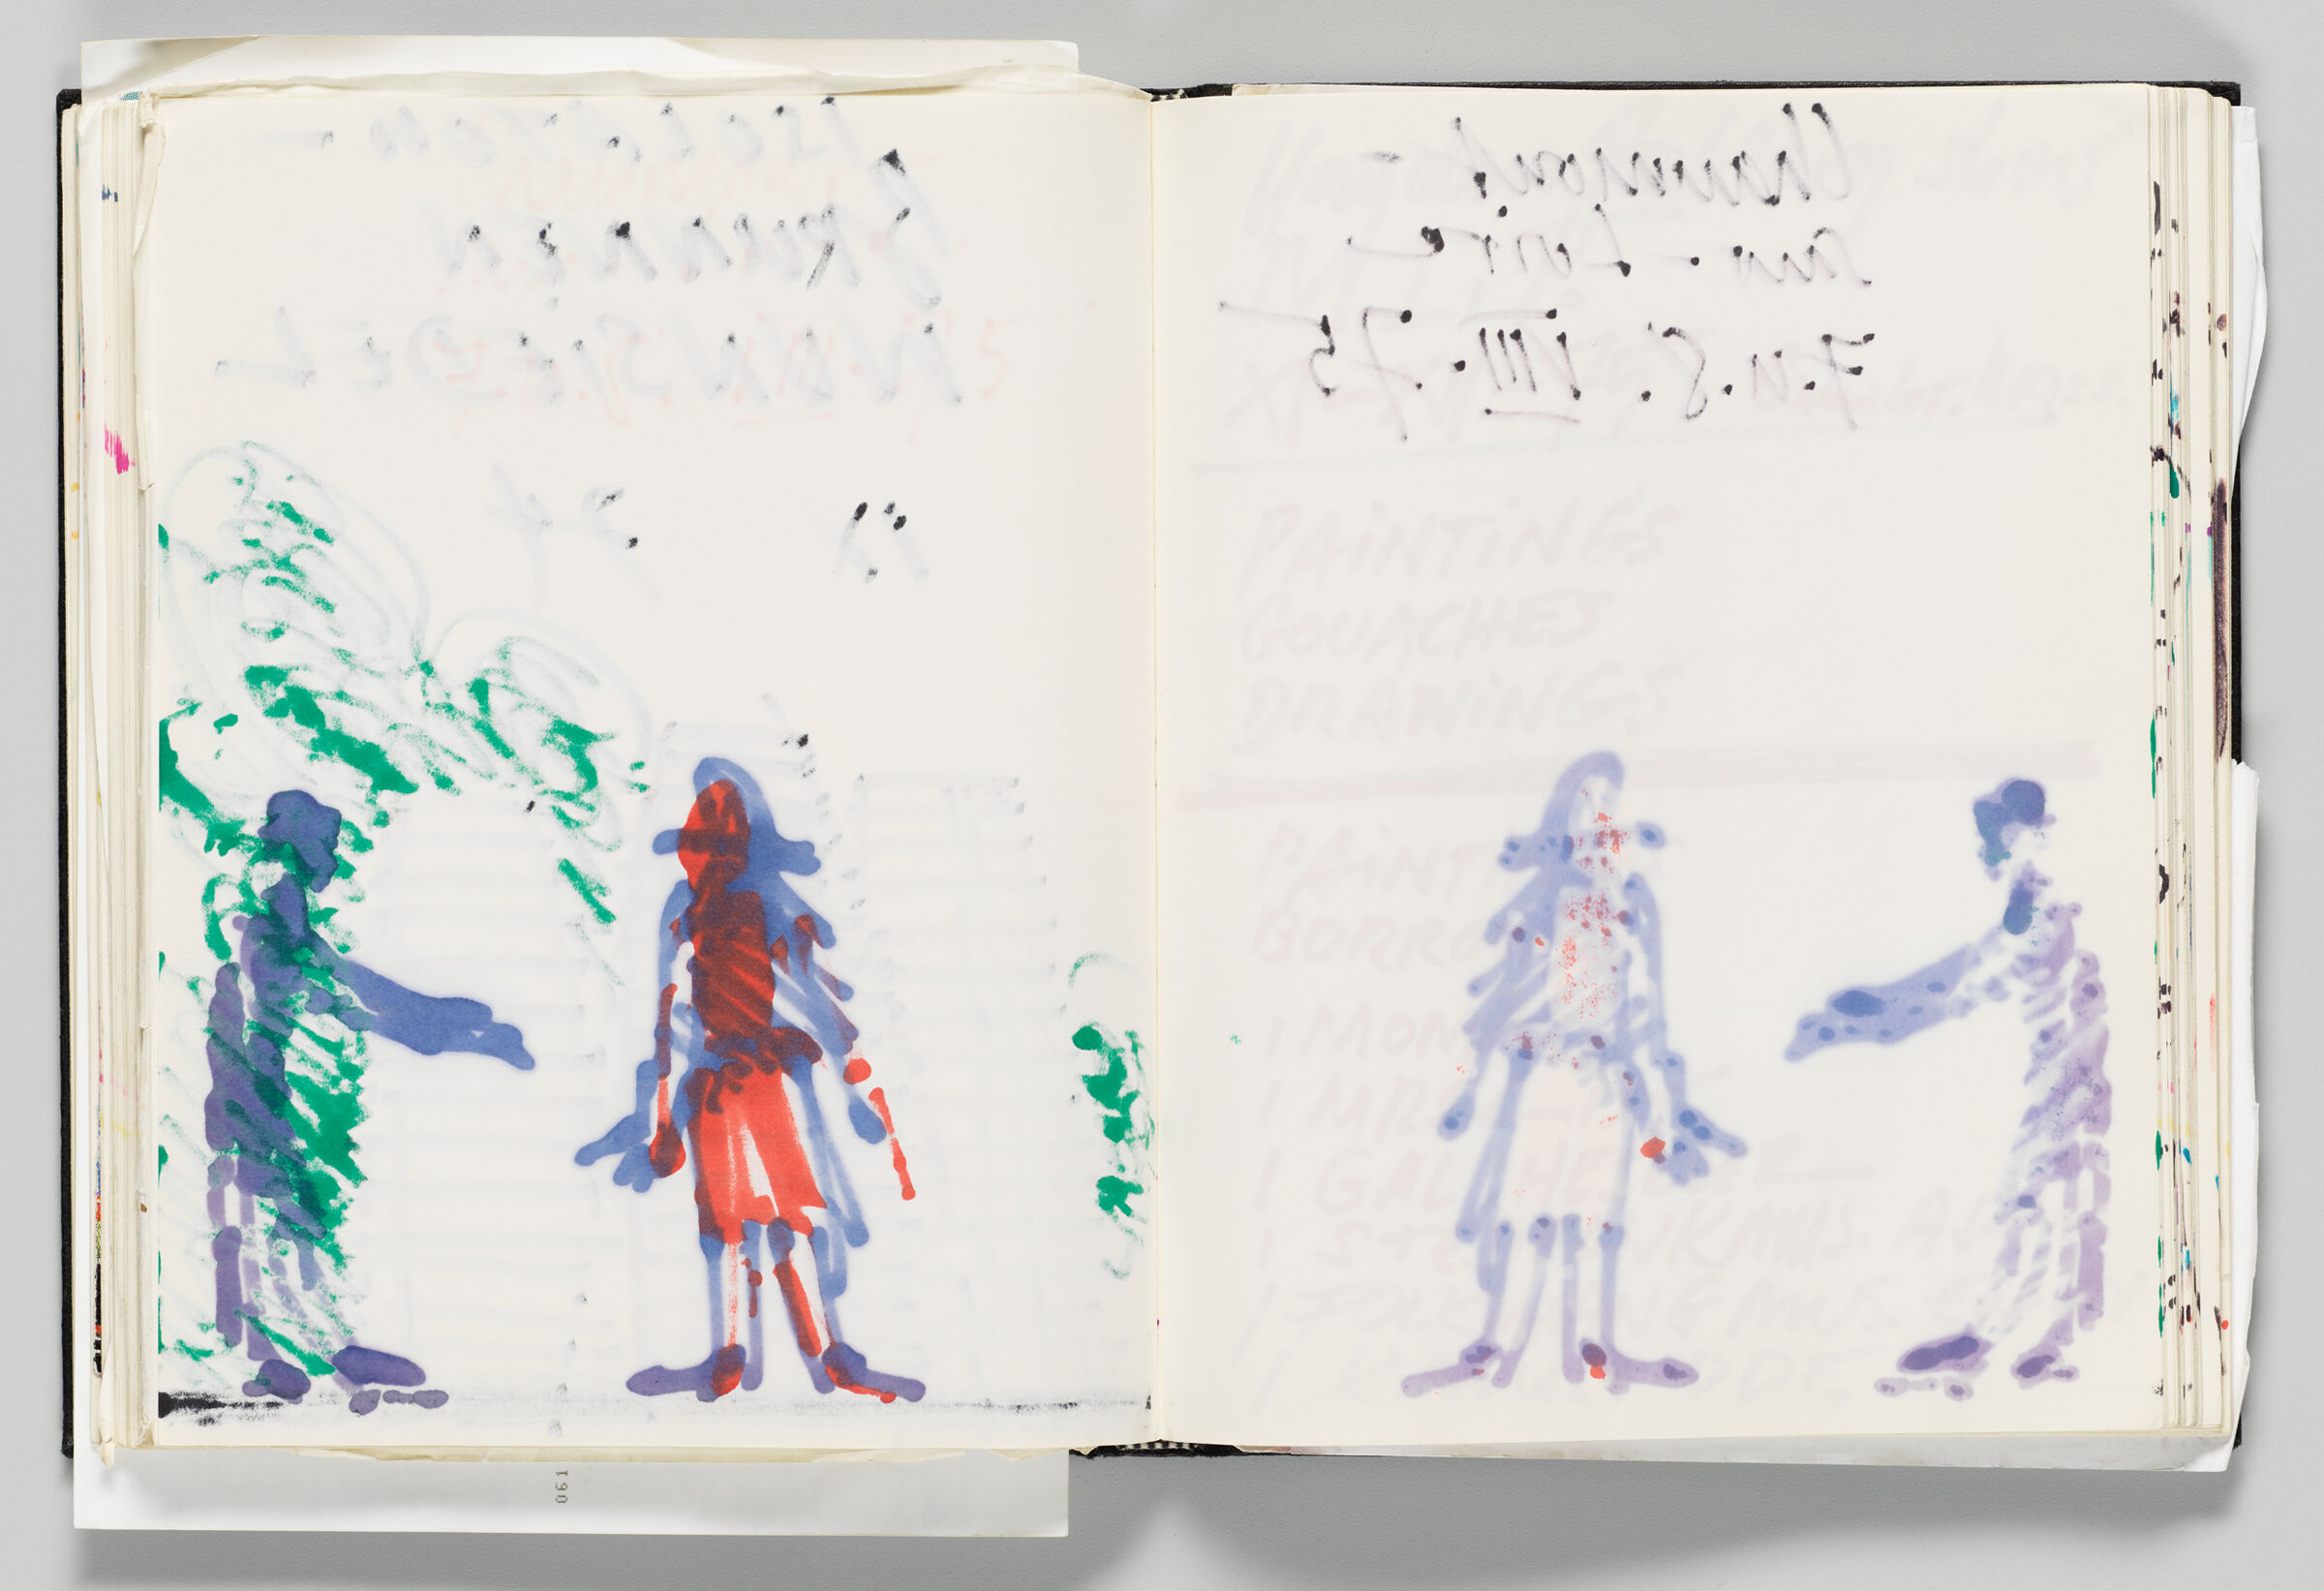 Untitled (Bleed-Through Of Previous Page, Left Page); Untitled (Color Transfer And Bleed-Through Of Following Page, Right Page)